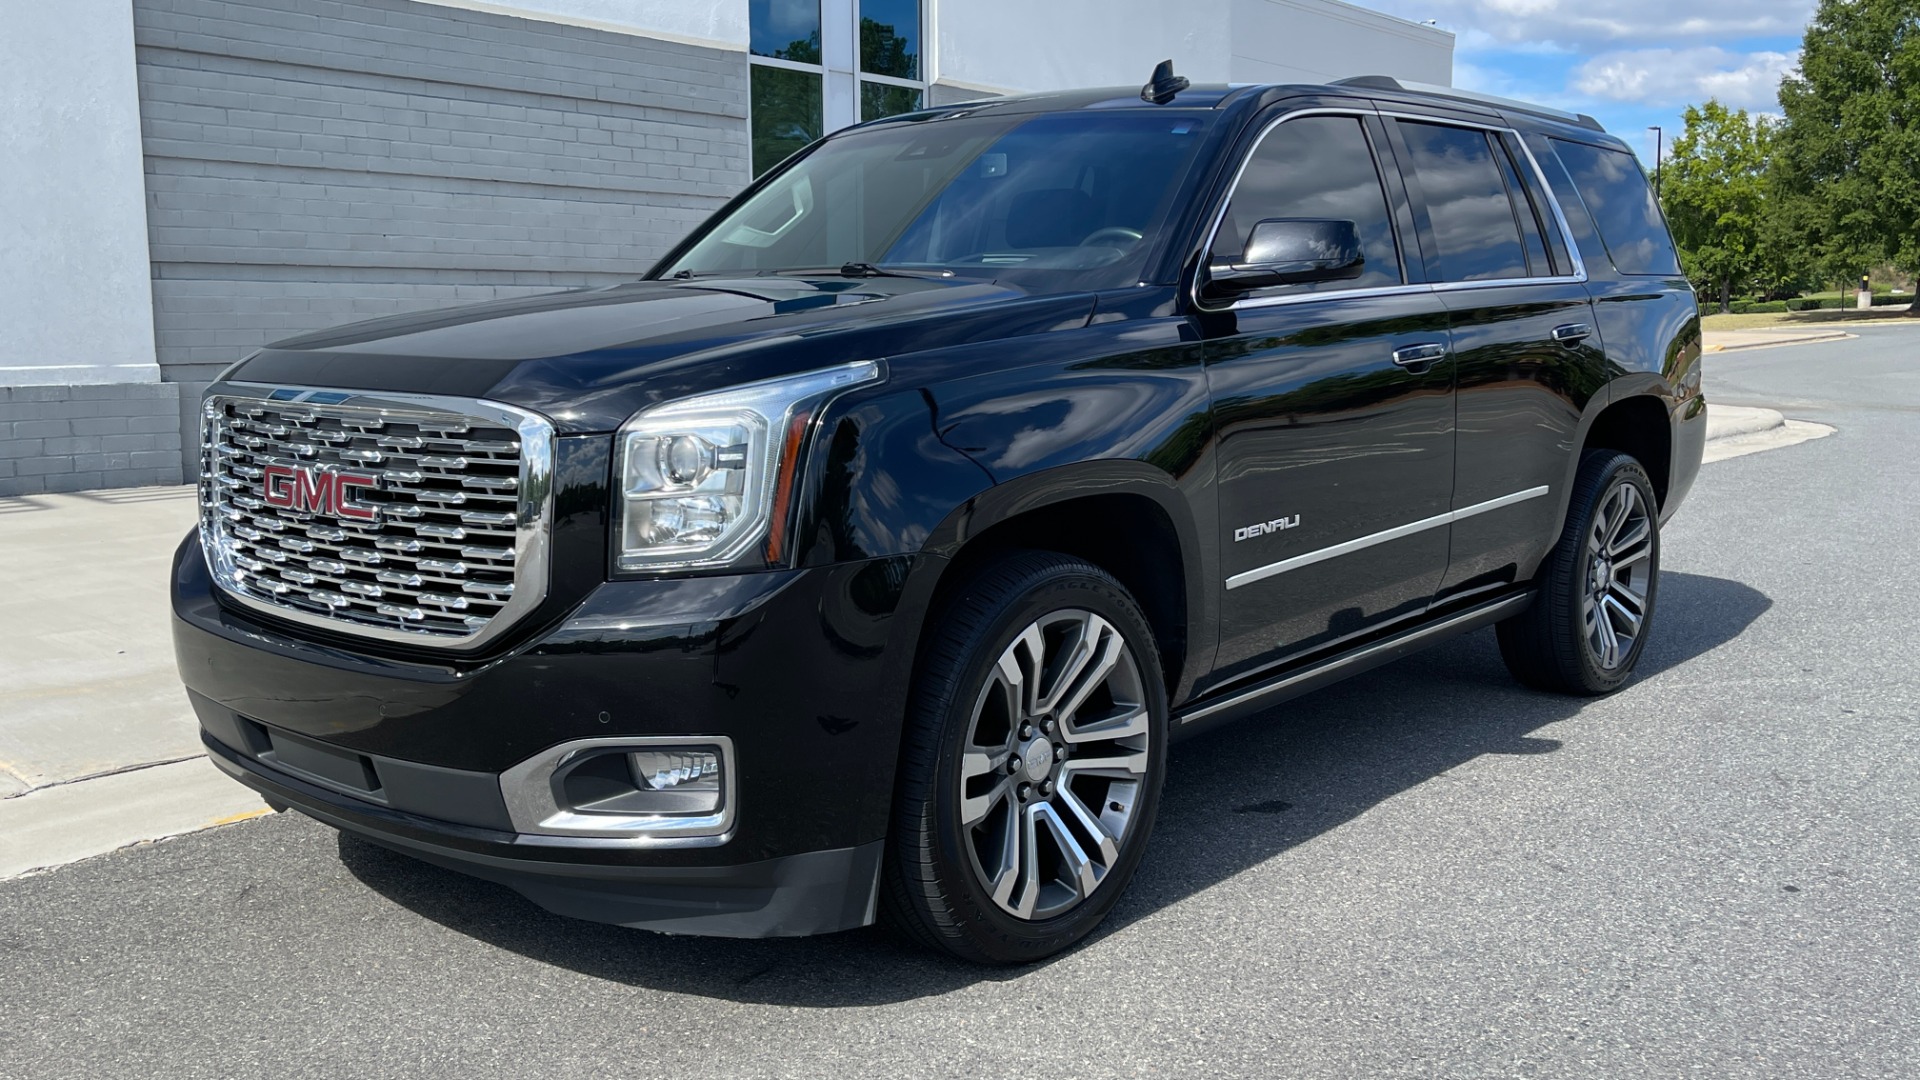 Used 2019 GMC Yukon DENALI / ULTIMATE PACKAGE / DVD / 4X4 / ADAPTIVE CRUISE / SUNROOF for sale $58,295 at Formula Imports in Charlotte NC 28227 5